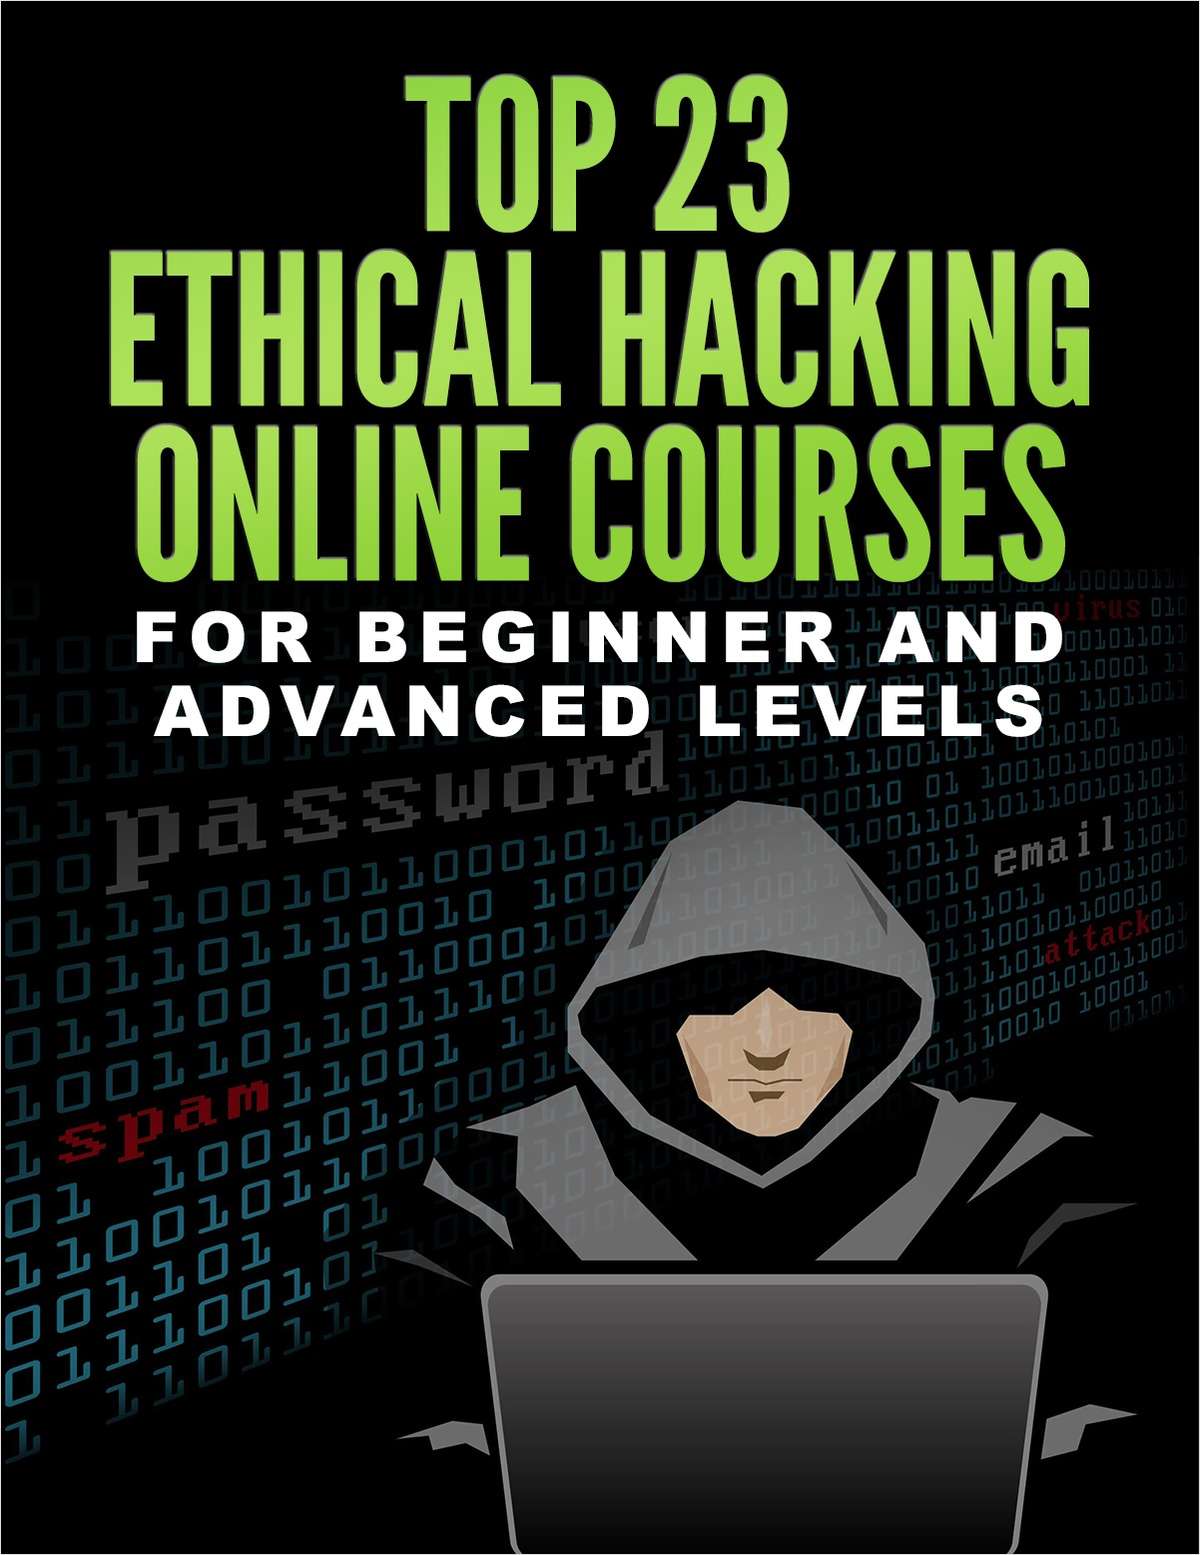 Top 23 Ethical Hacking Online Courses for Beginner and Advanced Levels